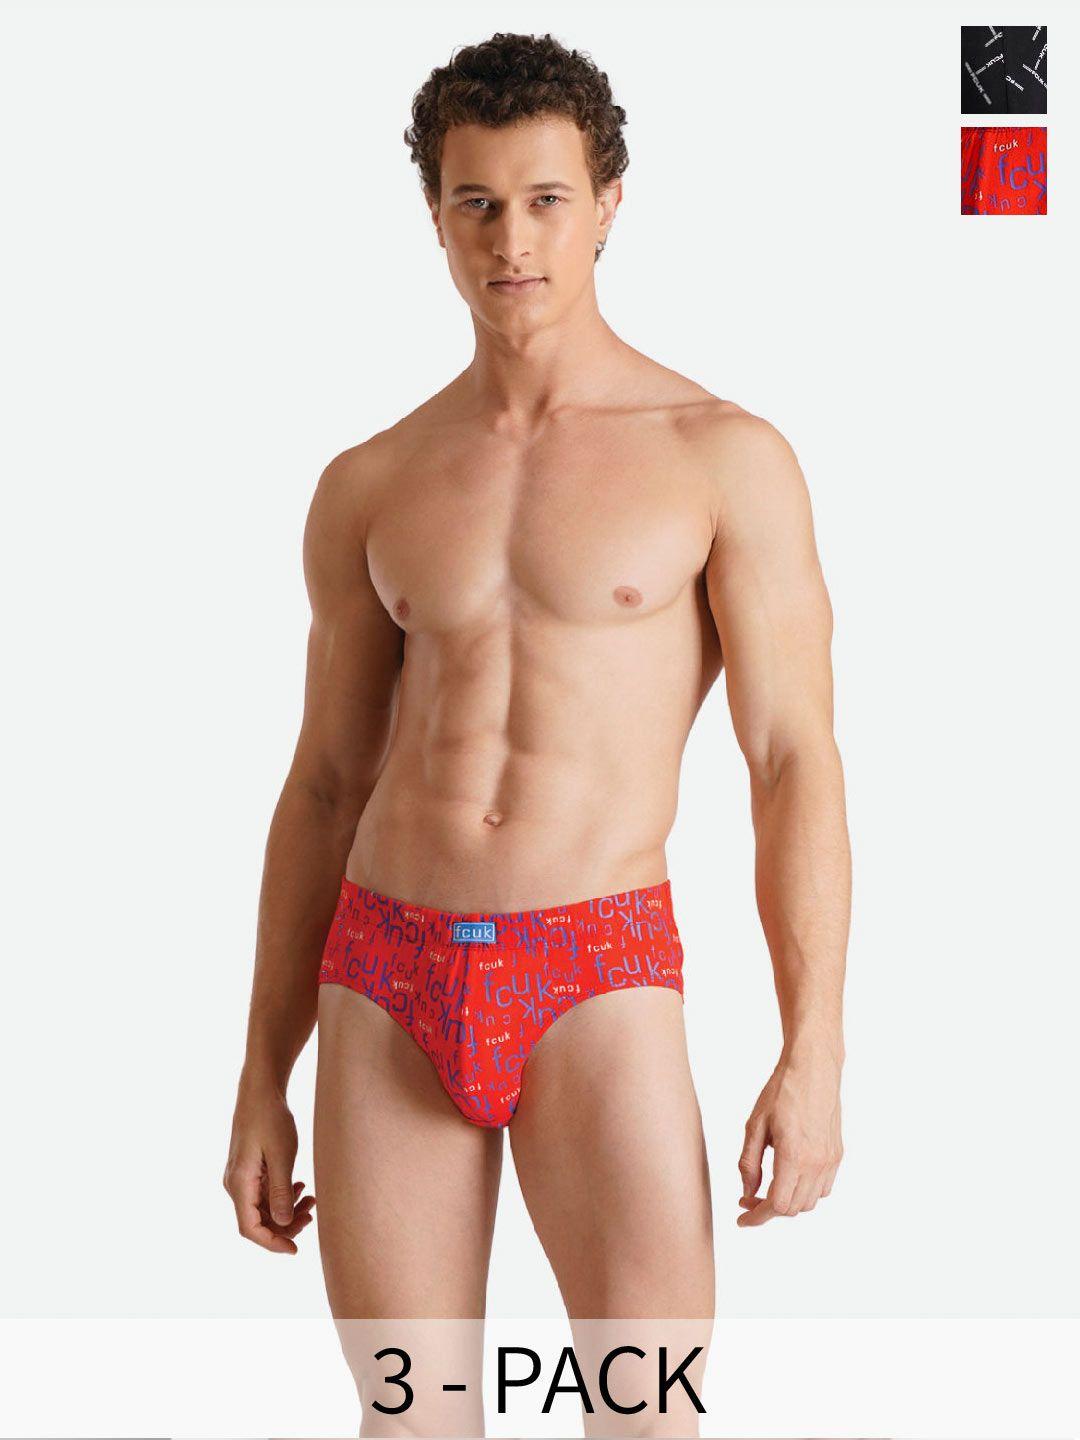 fcuk pack of 2 typography printed antimicrobial cotton basic briefs bru-02-jt blk1-fr aop